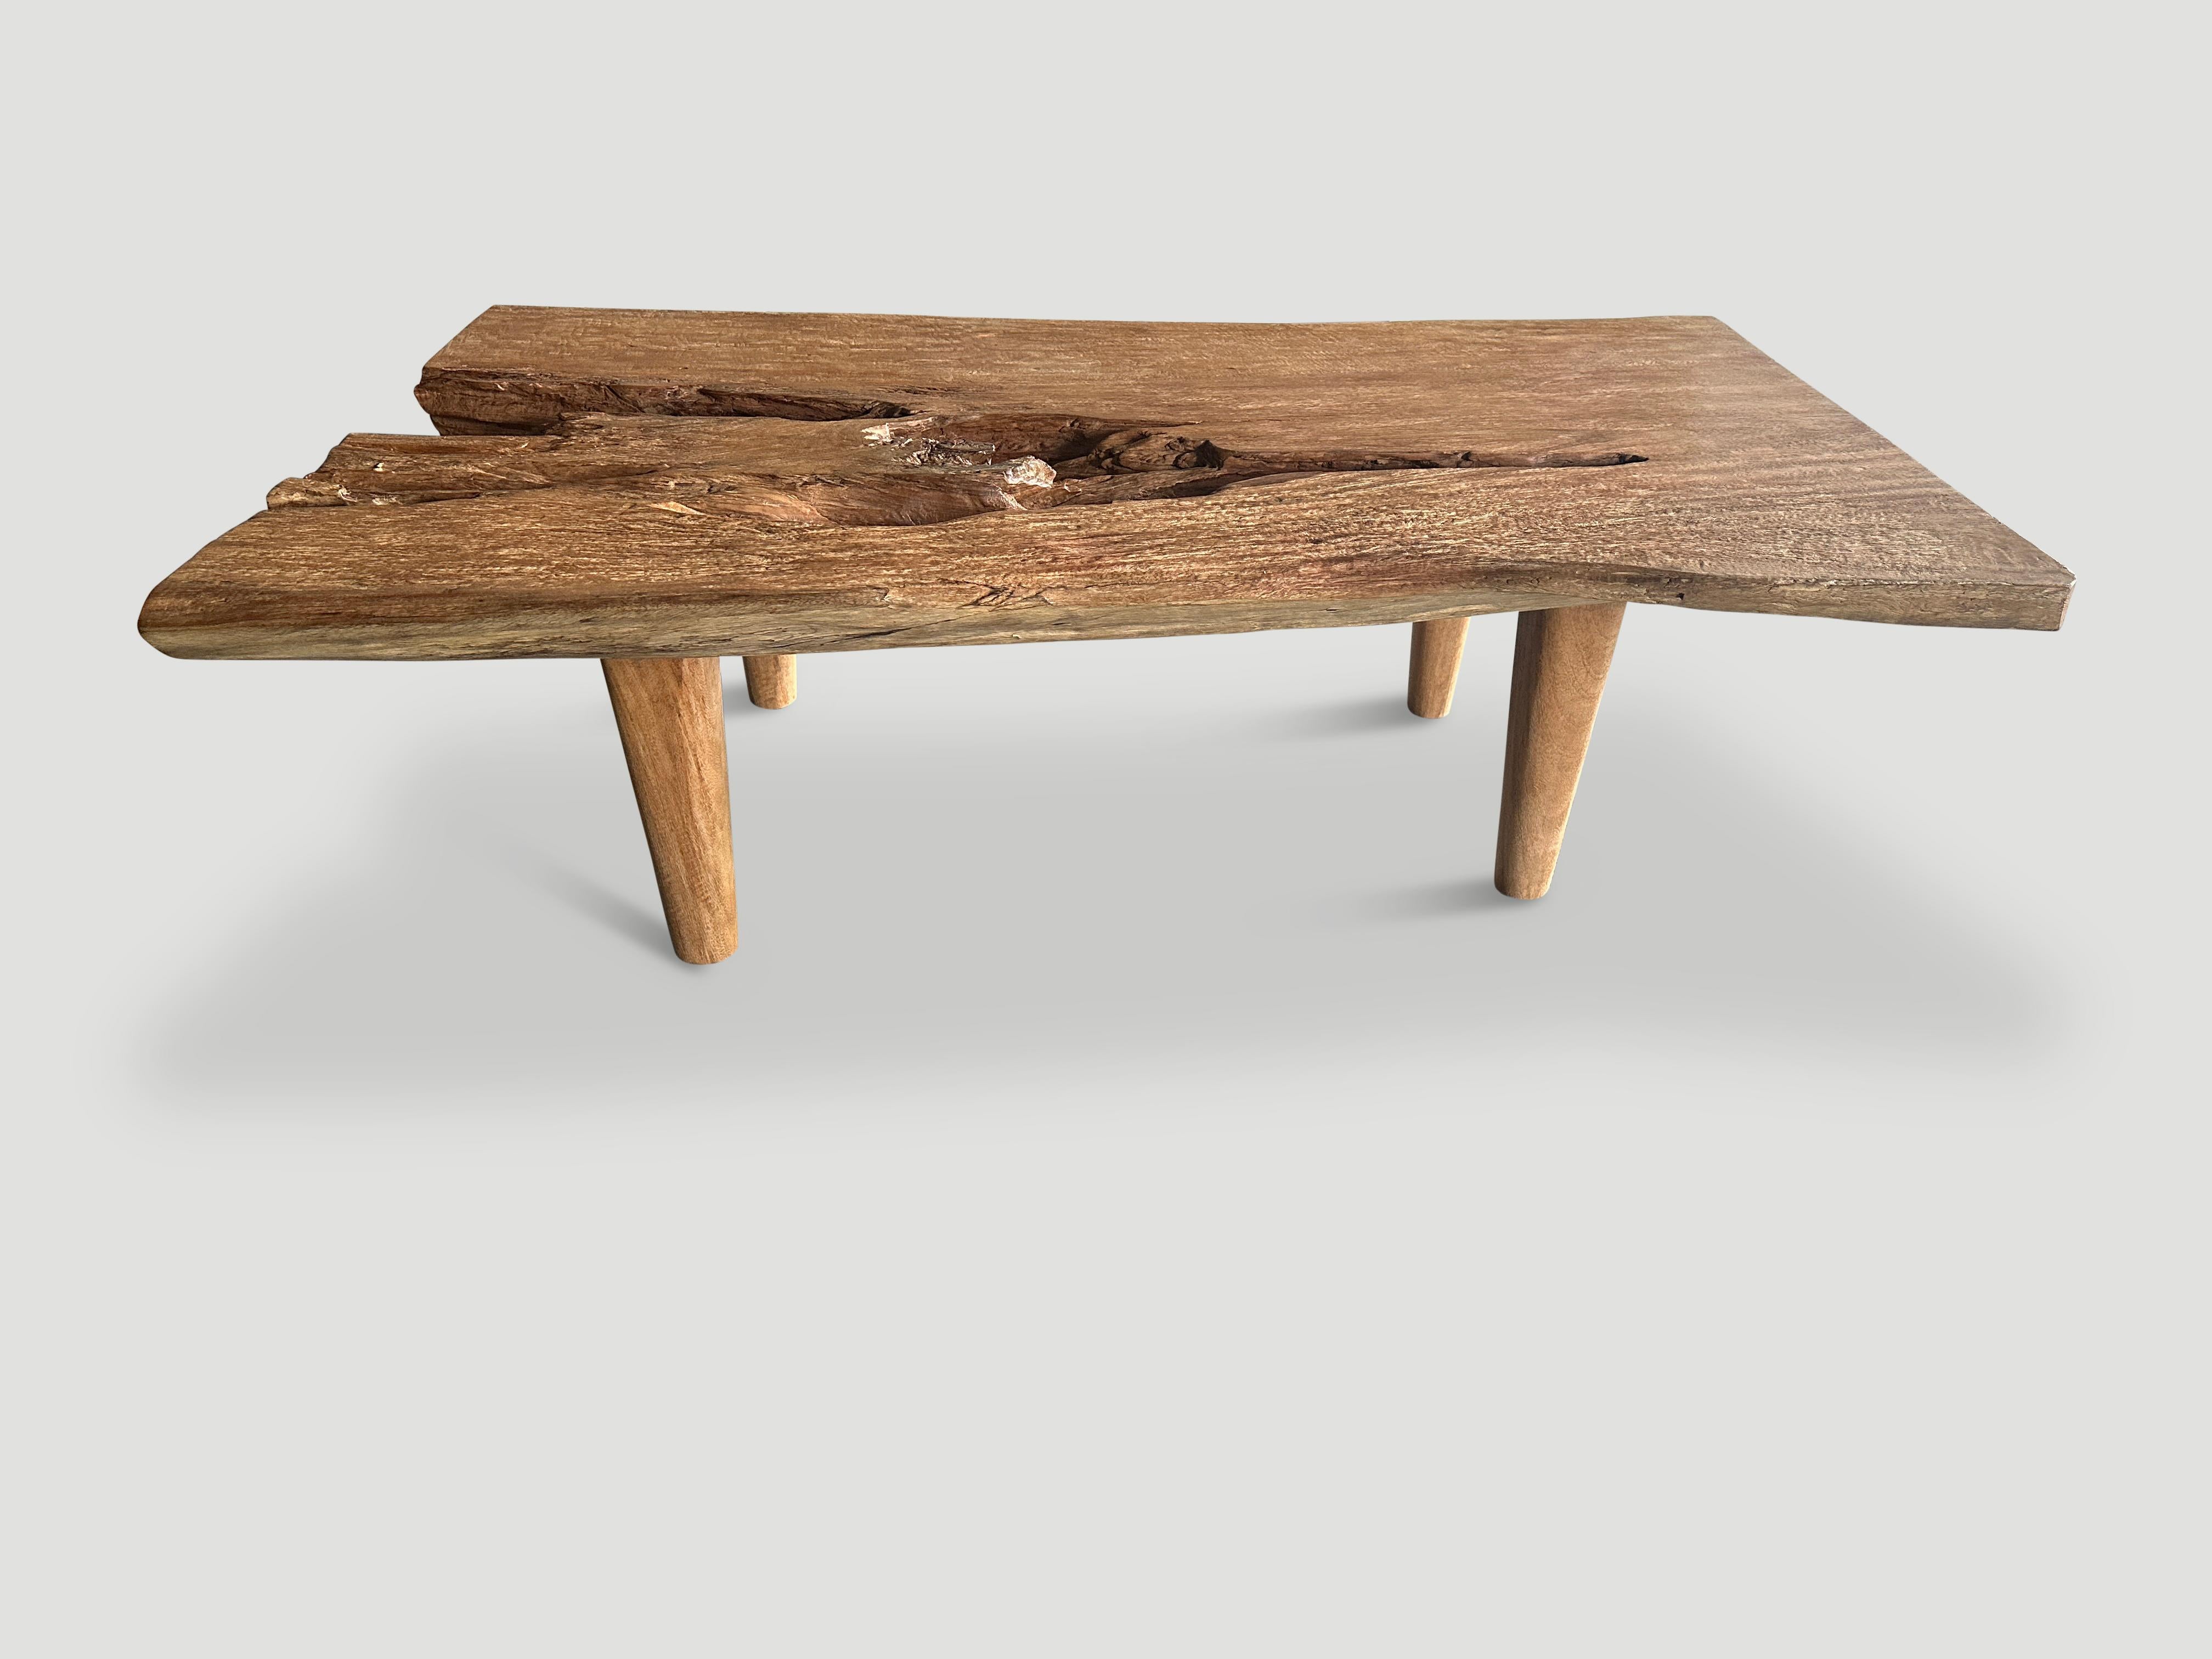 An impressive thick suar wood slab is shaped to produce this one of a kind coffee table, whilst respecting the natural organic wood. We added minimalist cylinder legs to this single slab and finished with a natural oil revealing the beautiful wood